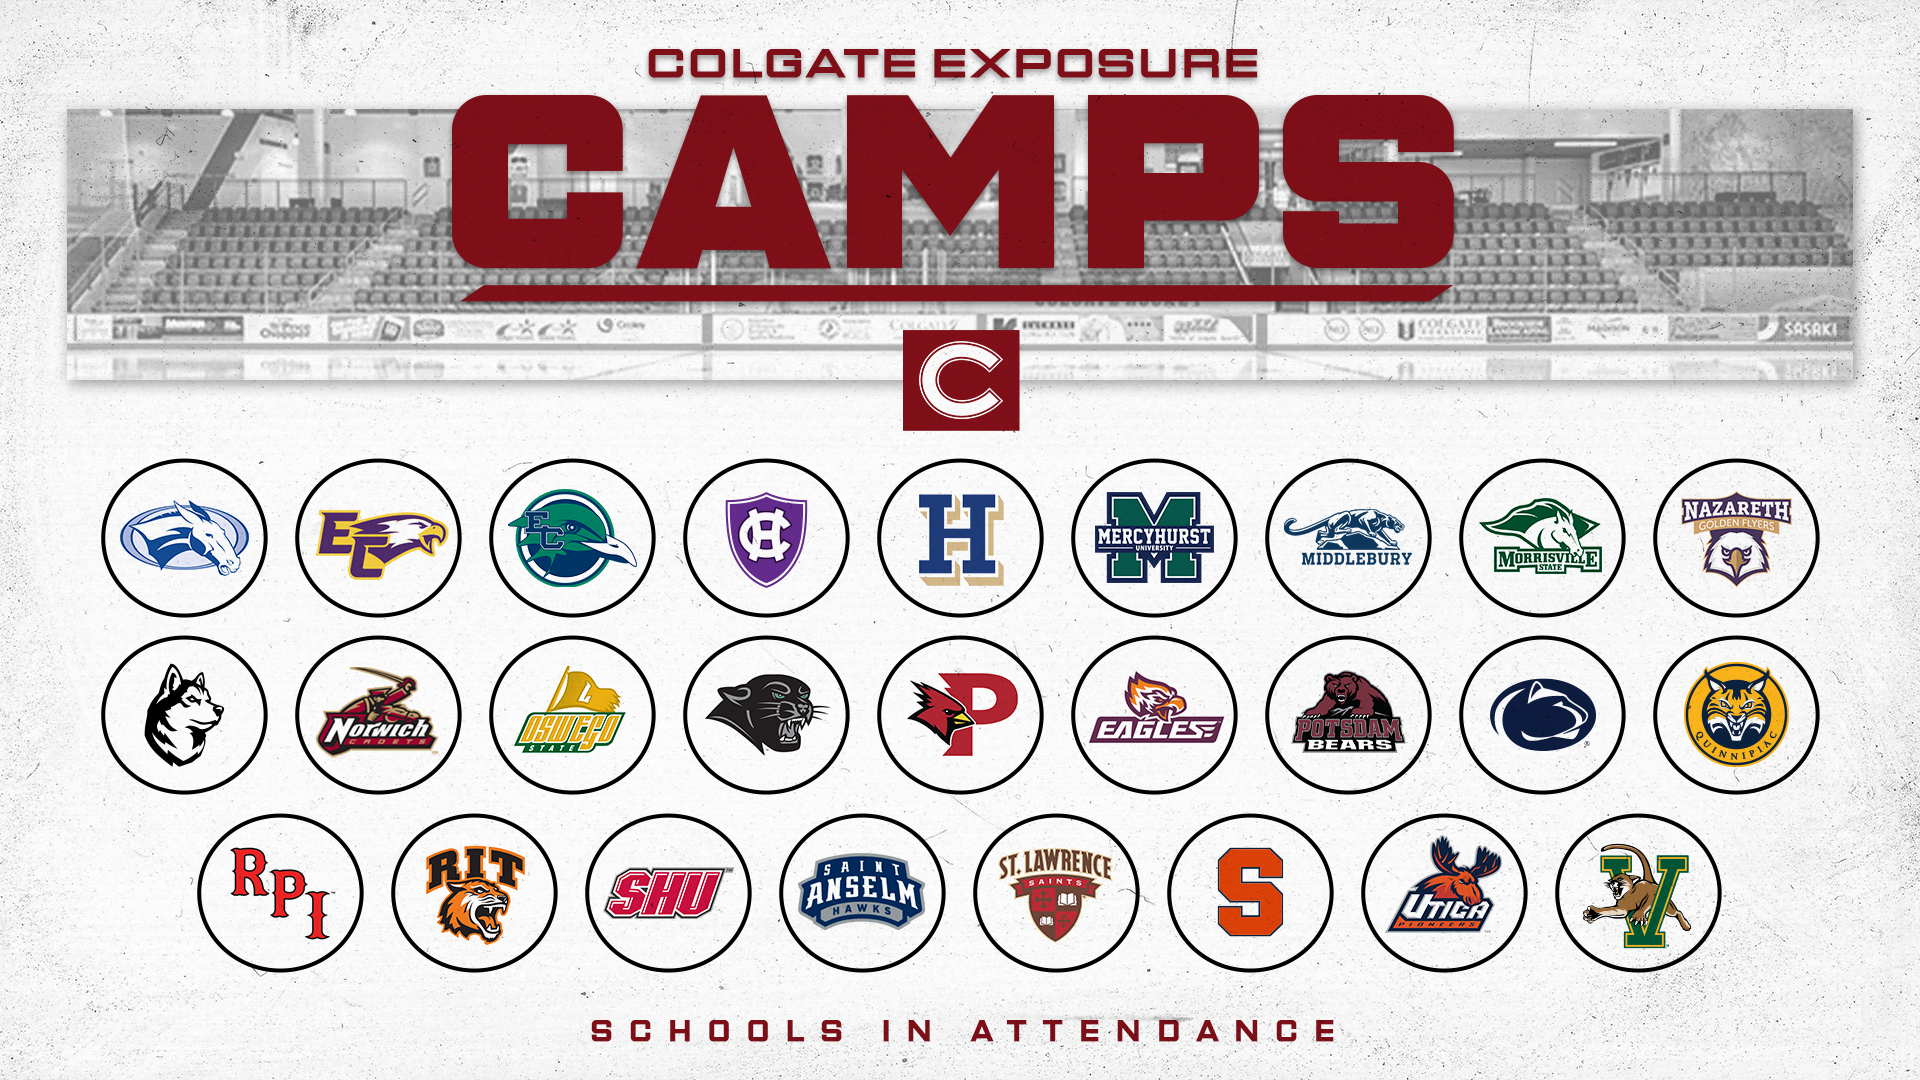 You Could Get Exposure to These College Coaches at Field Hockey Camp